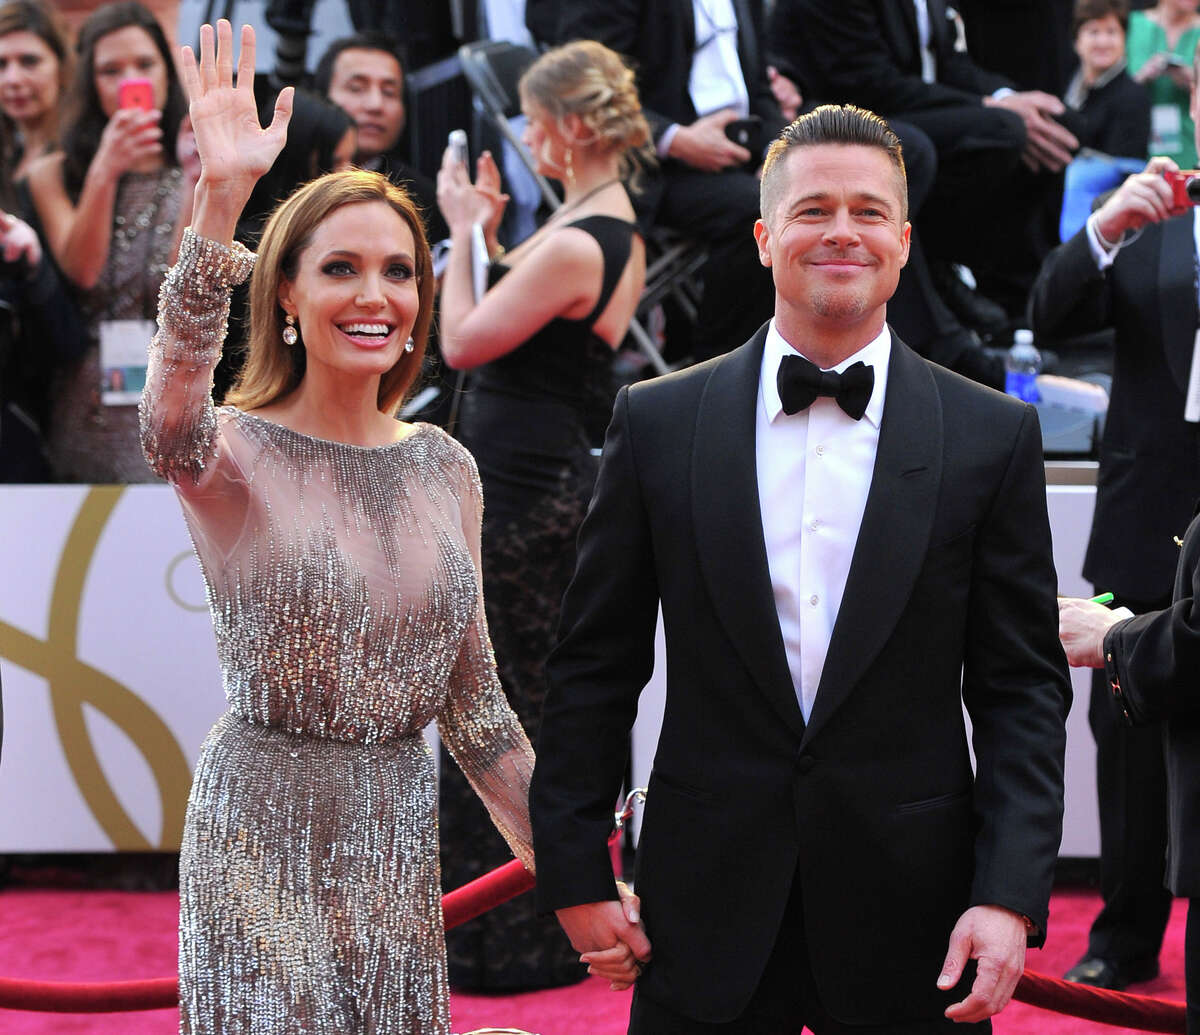 FILE - In this Sunday, March 2, 2014, file photo, Angelina Jolie, left, and Brad Pitt arrive at the Oscars at the Dolby Theatre in Los Angeles. Jolie and Pitt were married Saturday, Aug. 23, 2014, in France, according to a spokesman for the couple. (Photo by Vince Bucci/Invision/AP, File)